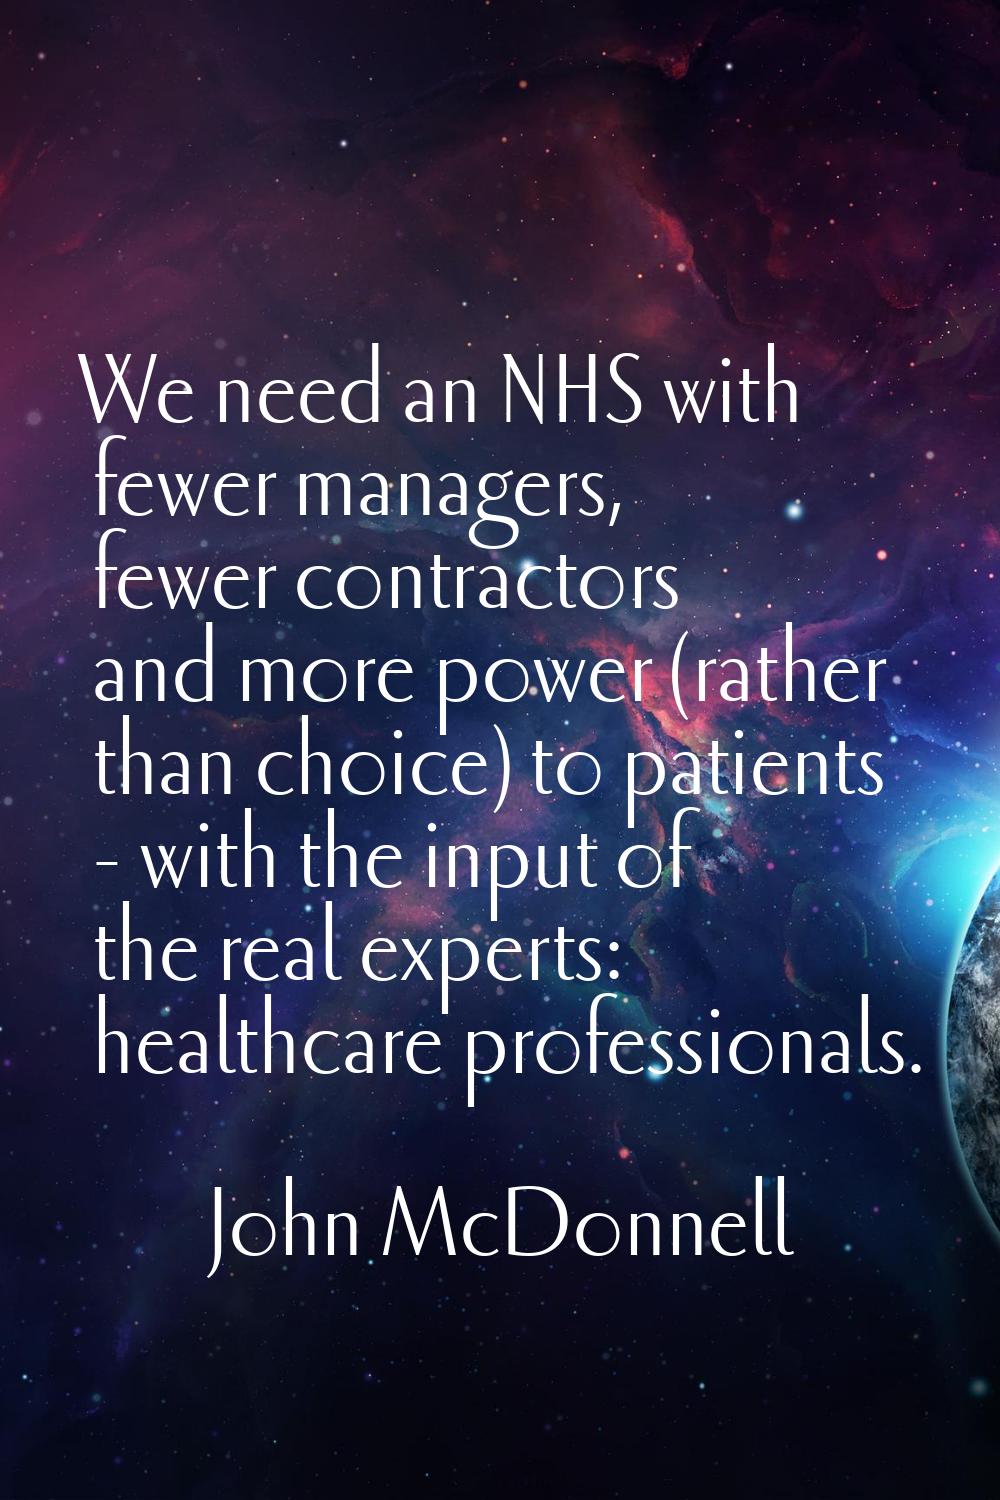 We need an NHS with fewer managers, fewer contractors and more power (rather than choice) to patien